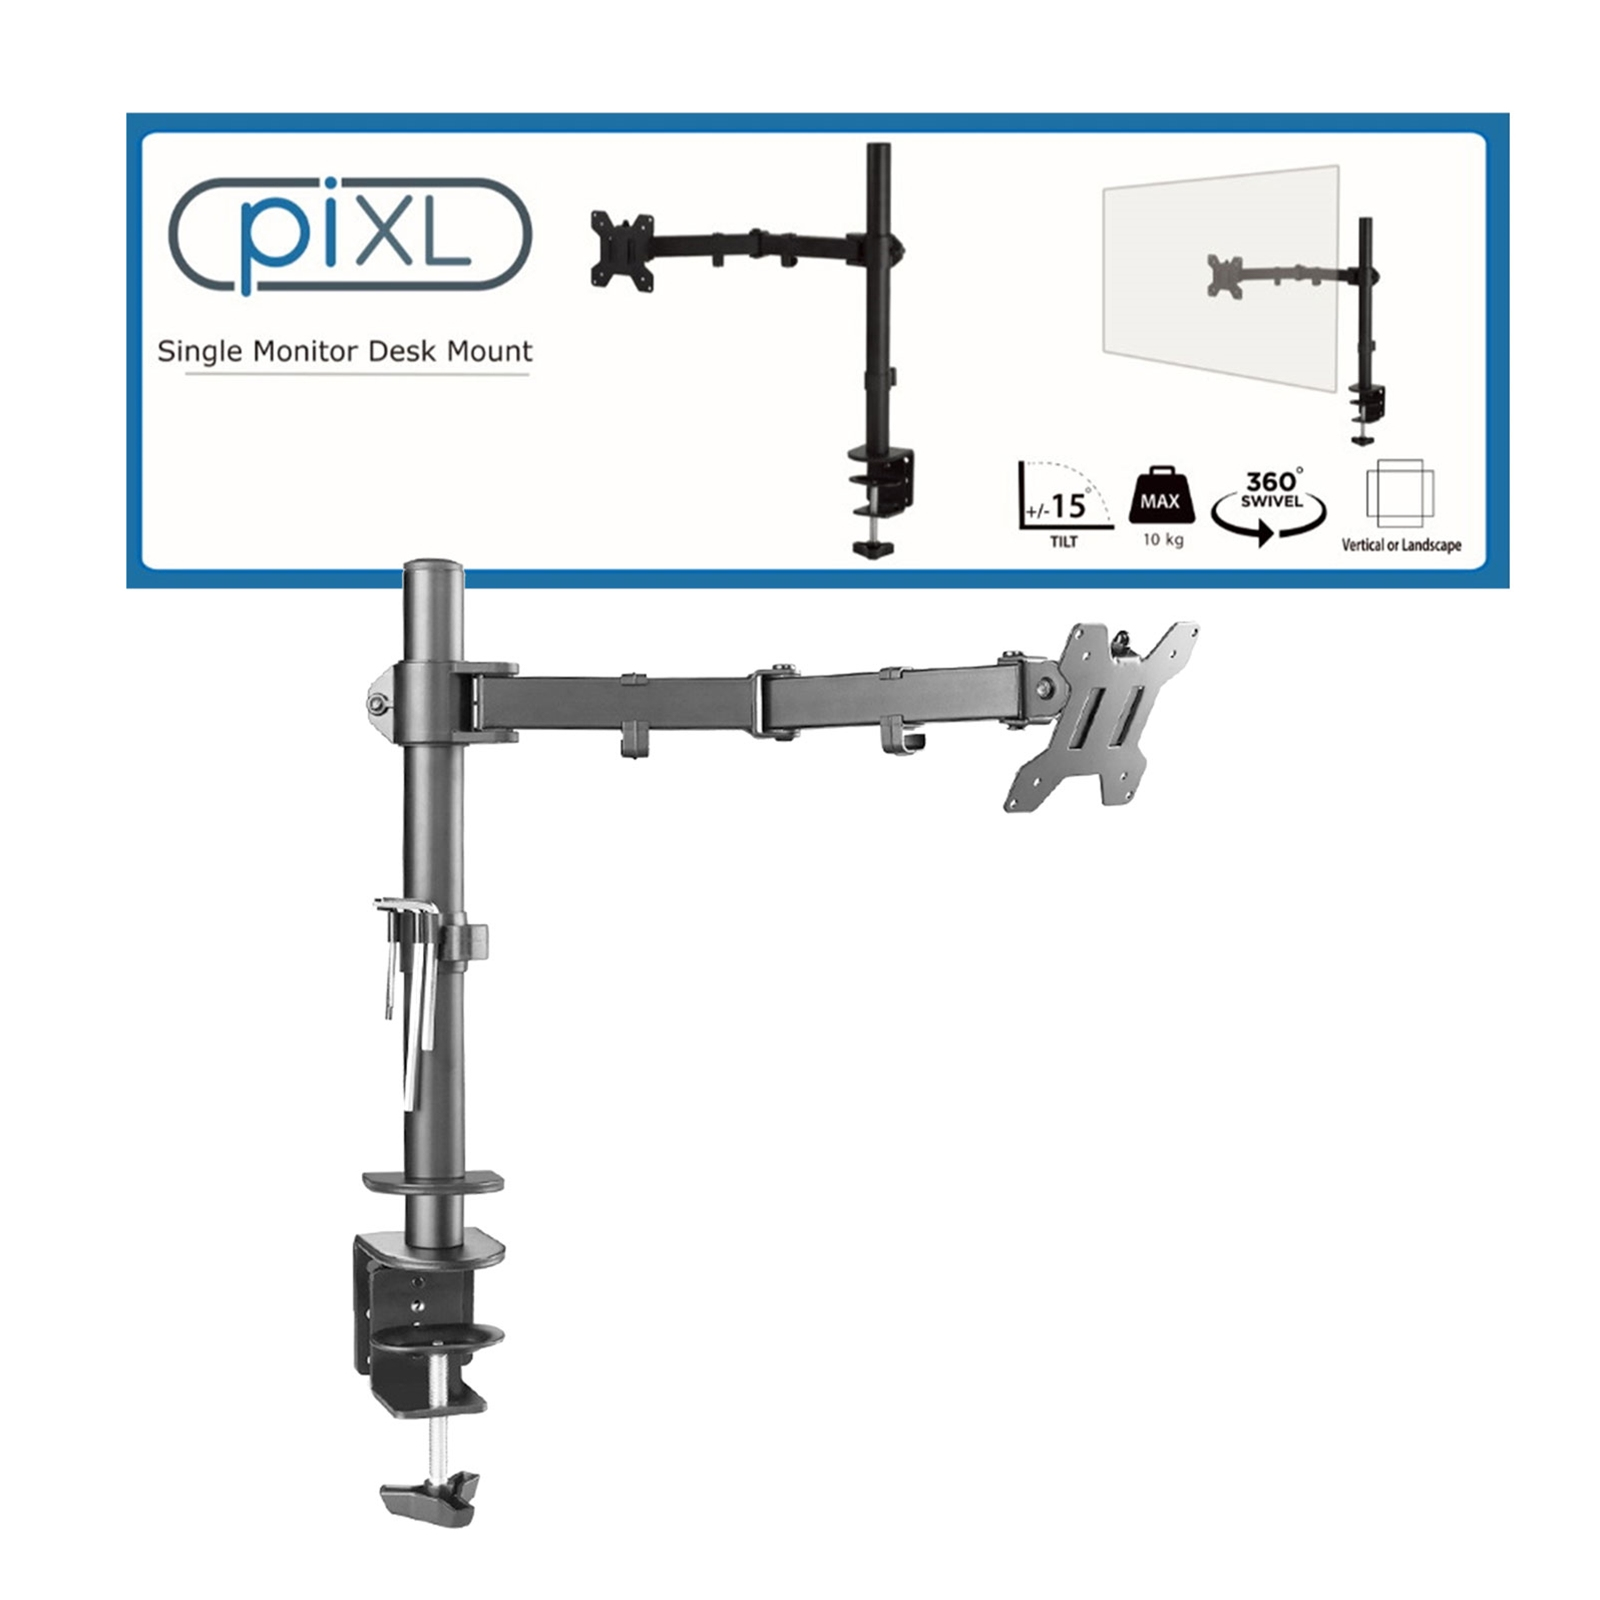 SINGLE ARM PIXL Single Monitor Arm, For Screens Upto 27 inch, Desk Mounted, VESA dimensions of 75x75mm or 100x100mm, 180 Degrees Swivel, 15 Degrees Tilt, Weight Upto 10kg, Built in Cable Management, Black